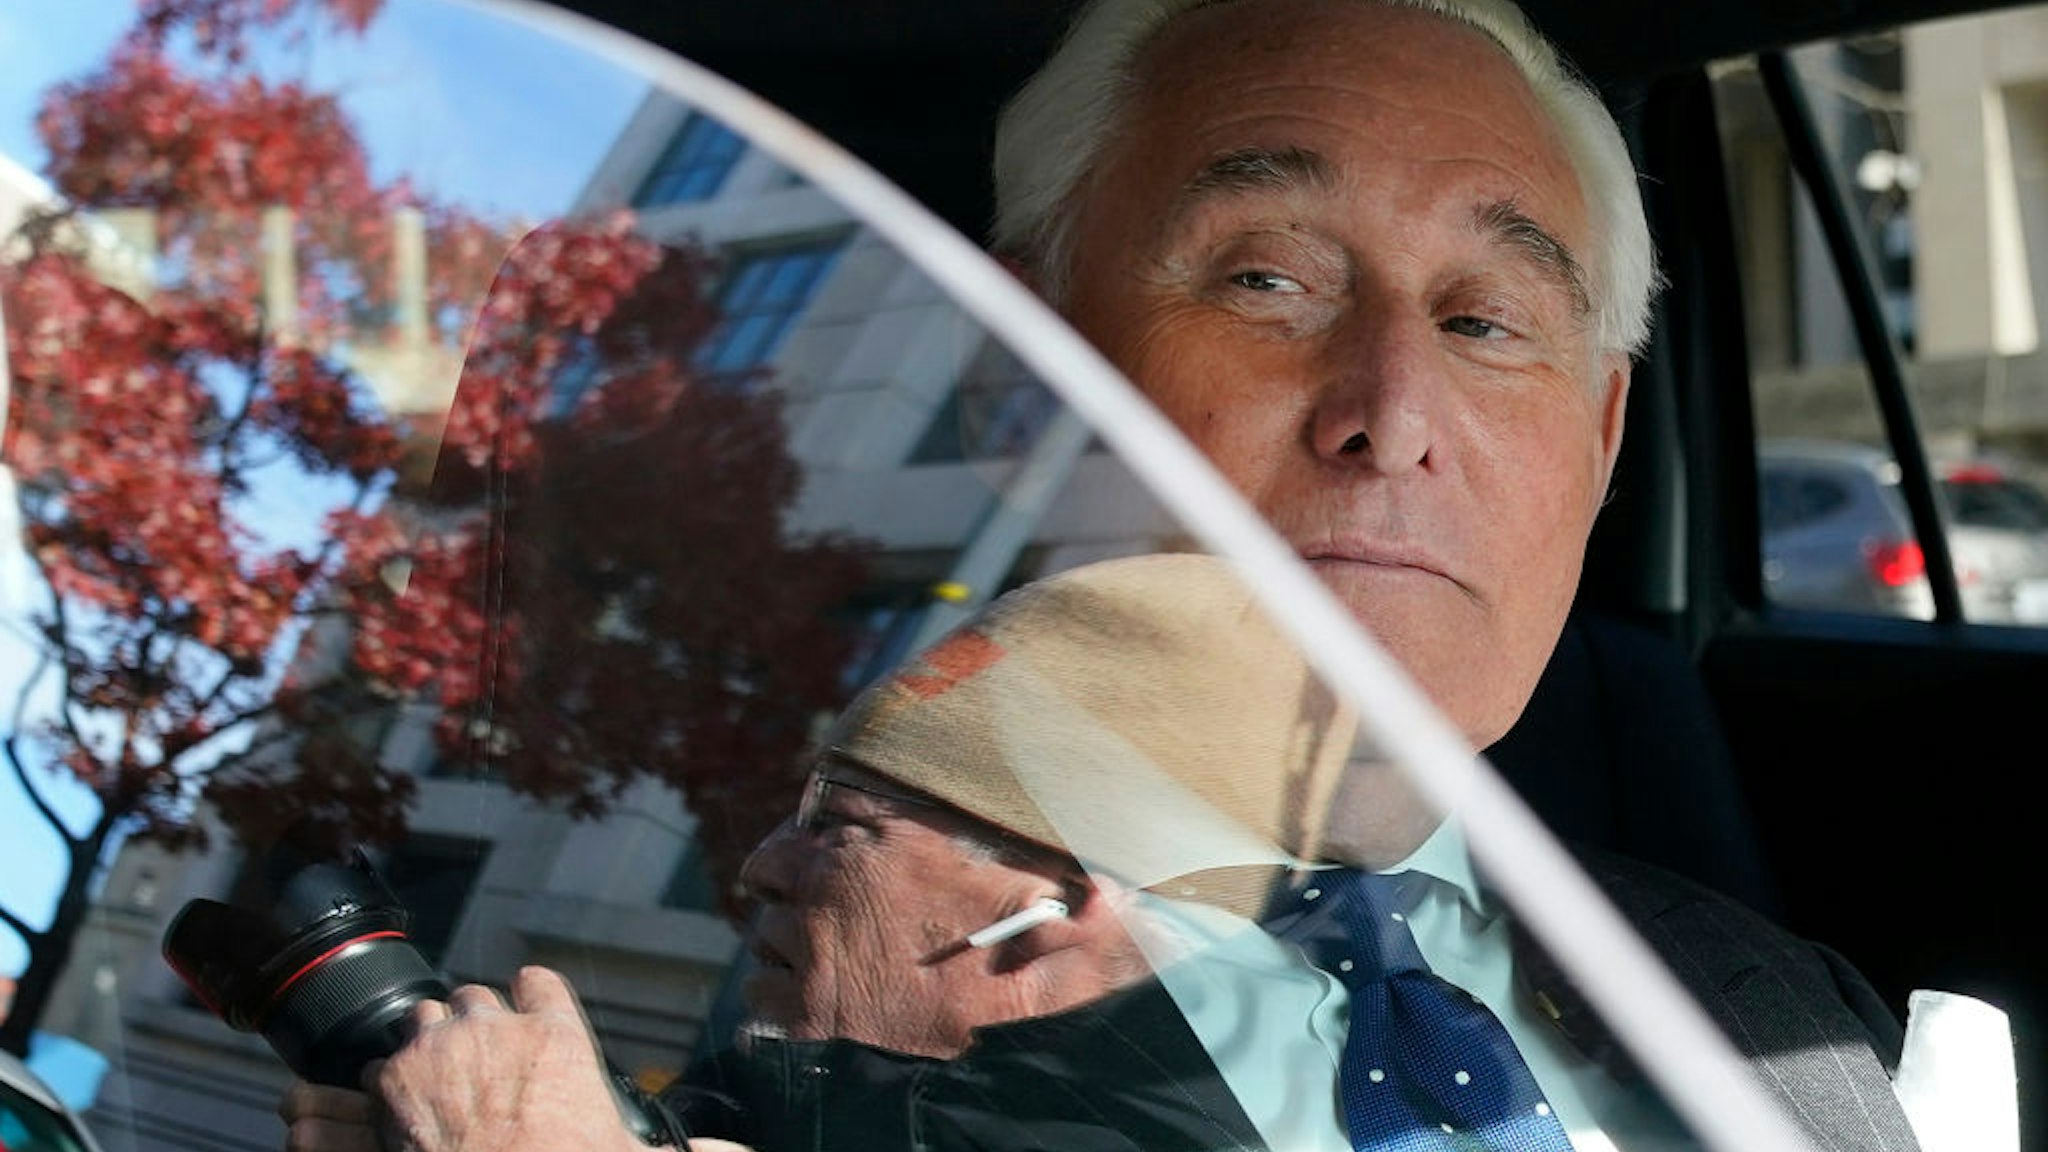 Former advisor to U.S. President Donald Trump, Roger Stone, departs the E. Barrett Prettyman United States Courthouse after being found guilty of obstructing a congressional investigation into Russia’s interference in the 2016 election on November 15, 2019 in Washington, DC.